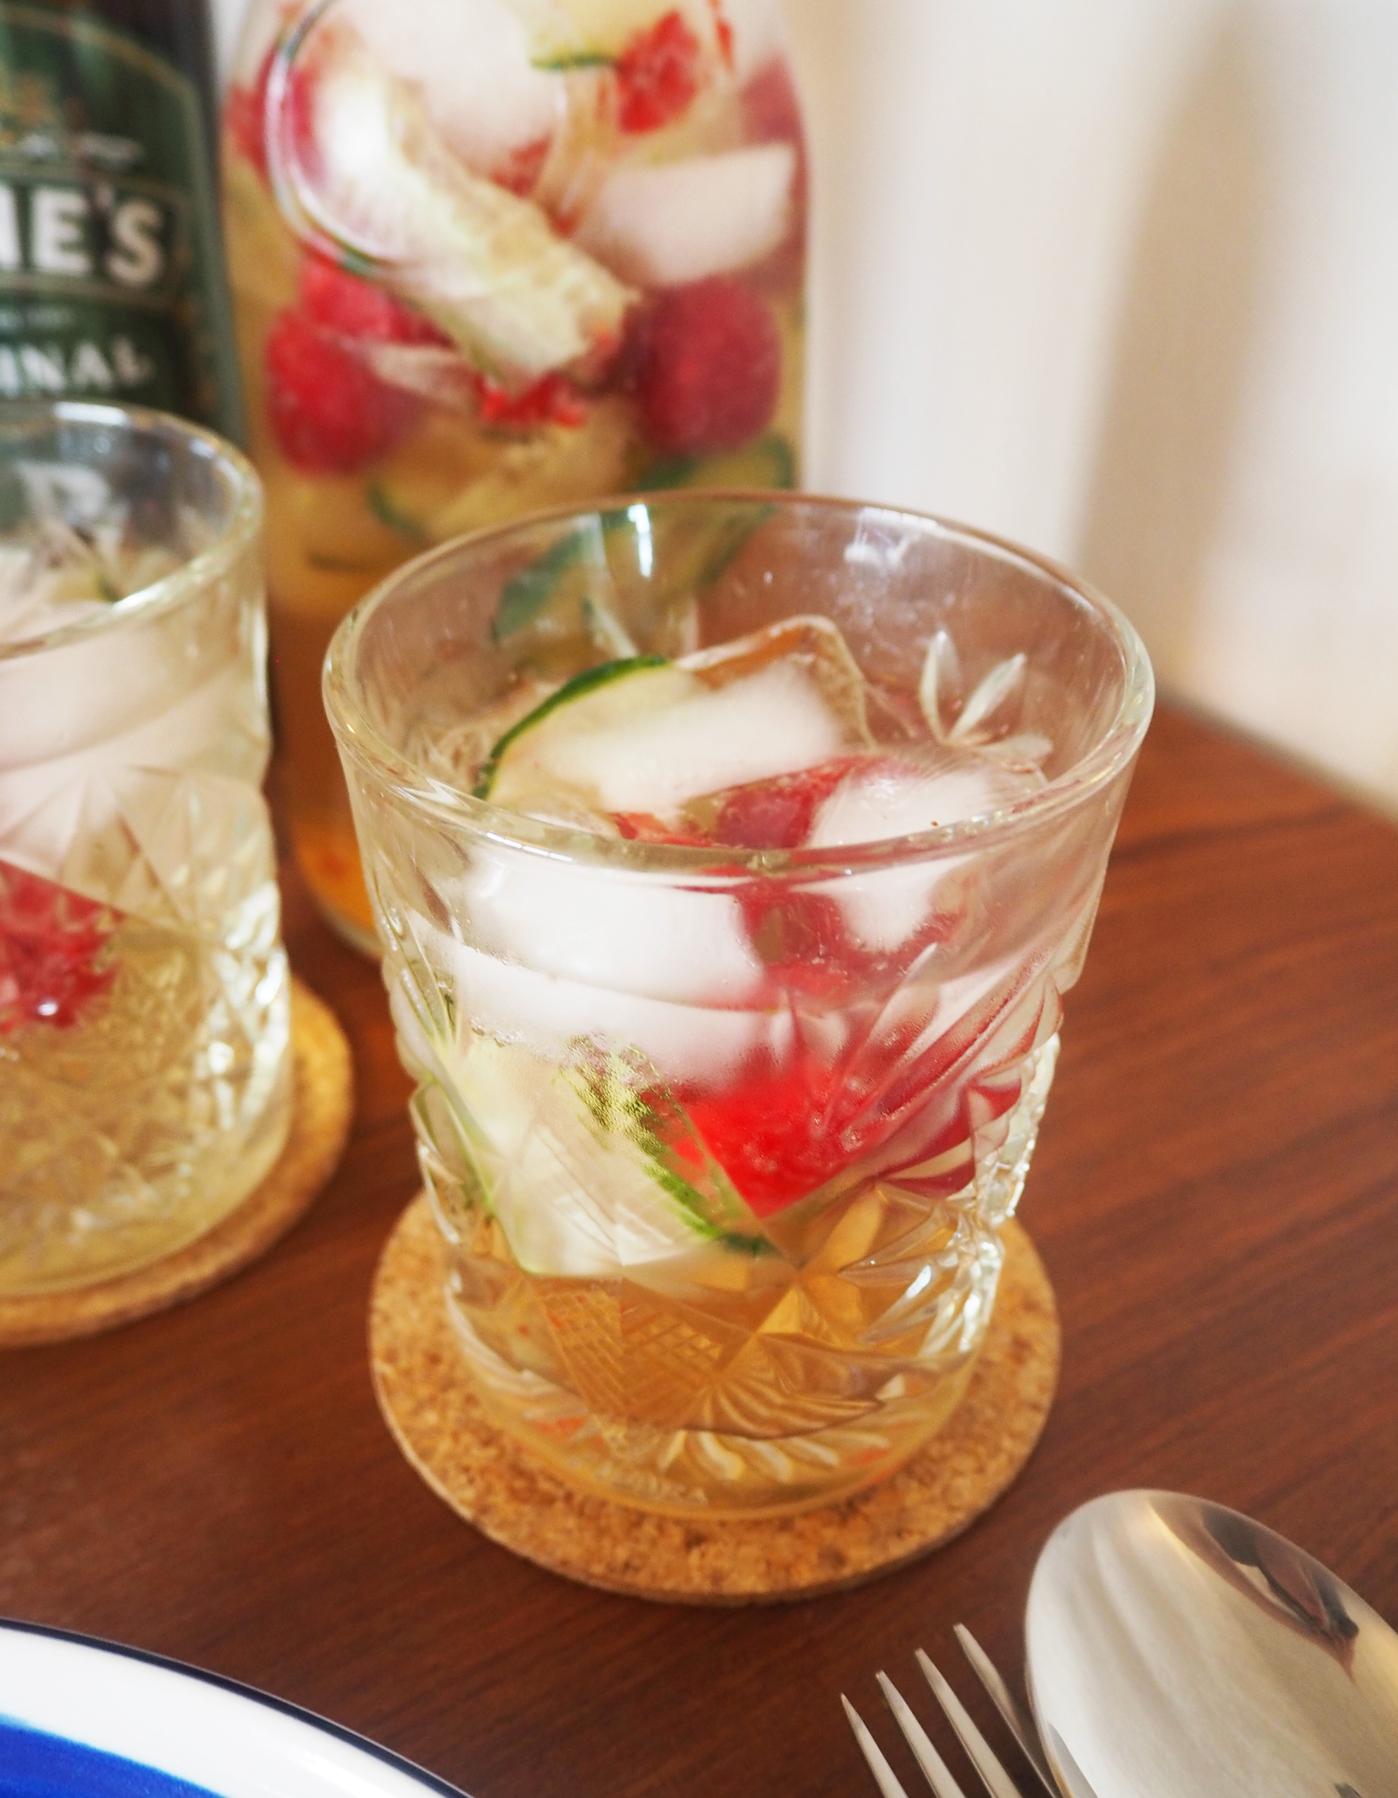  Ginger wine adds a subtle kick to this delicious cocktail, hitting just the right spot.